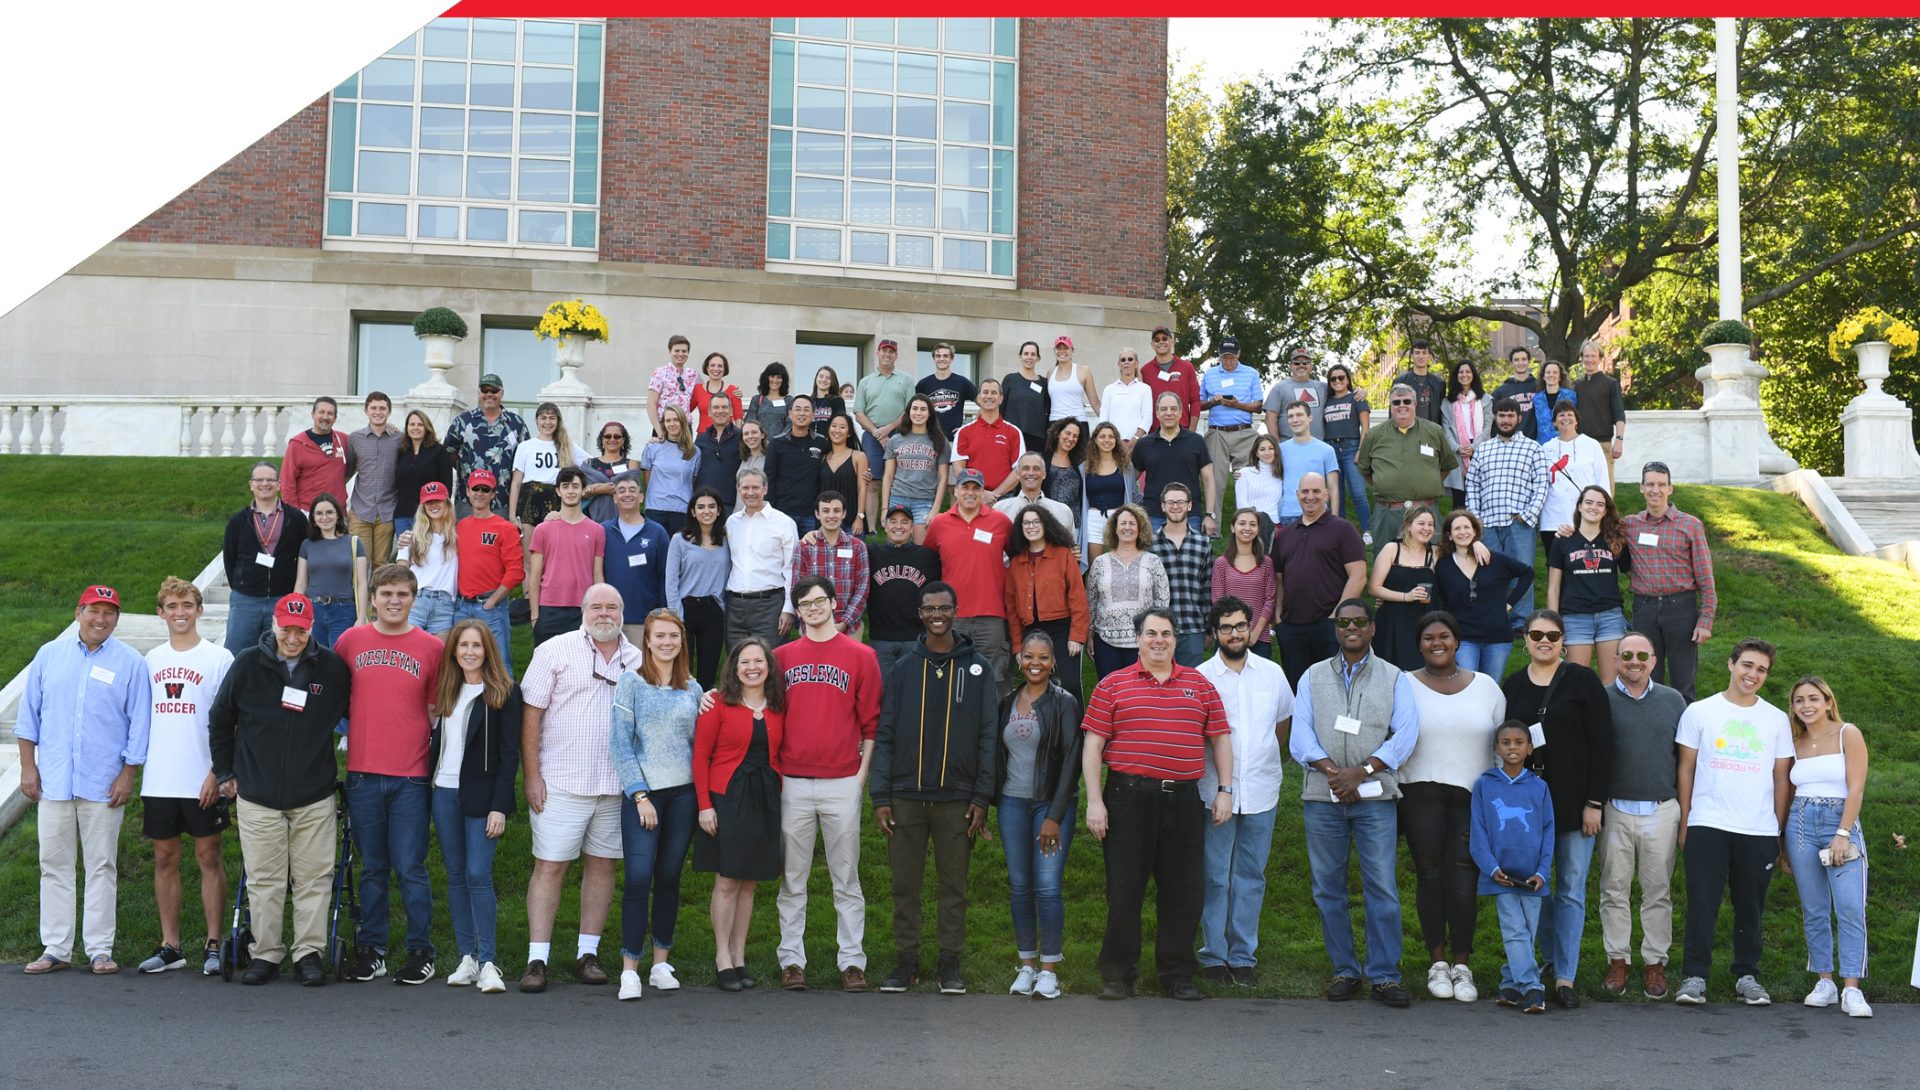 Annual Legacy Photo Highlights Generational Wesleyan Connections